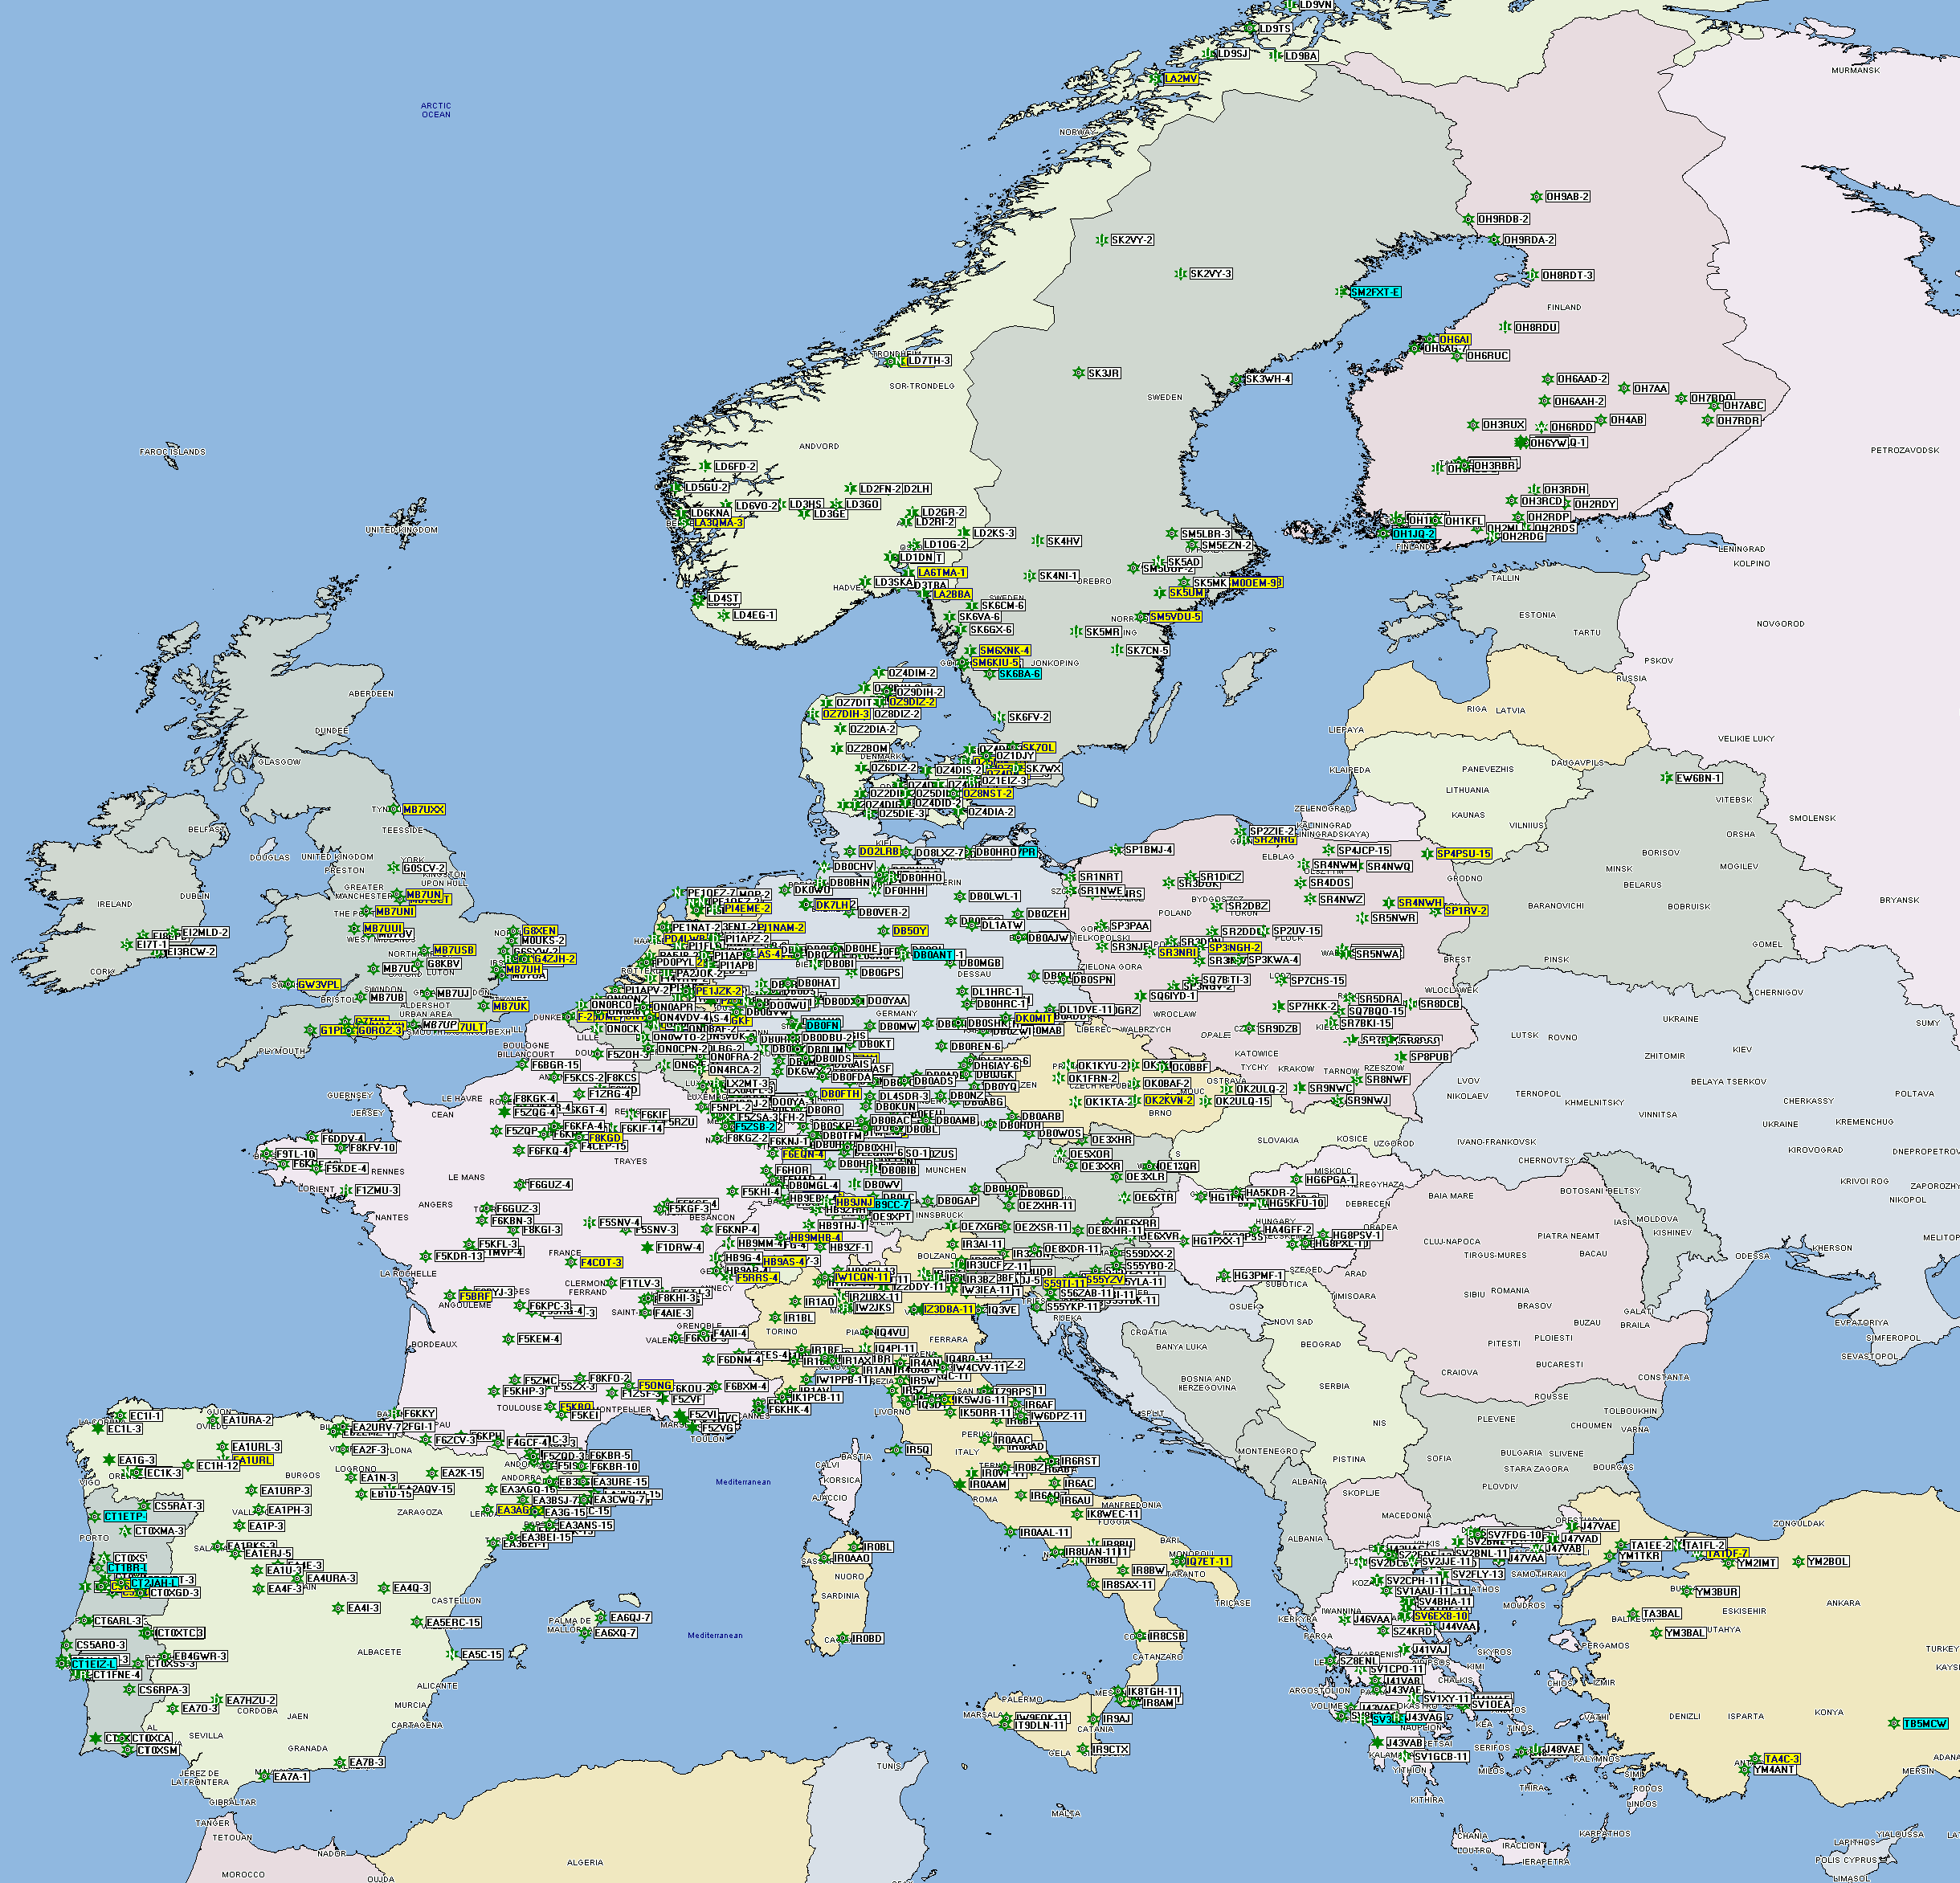 APRS Digpeaters In Europe - Large View  Scroll - Scroll - Scroll!